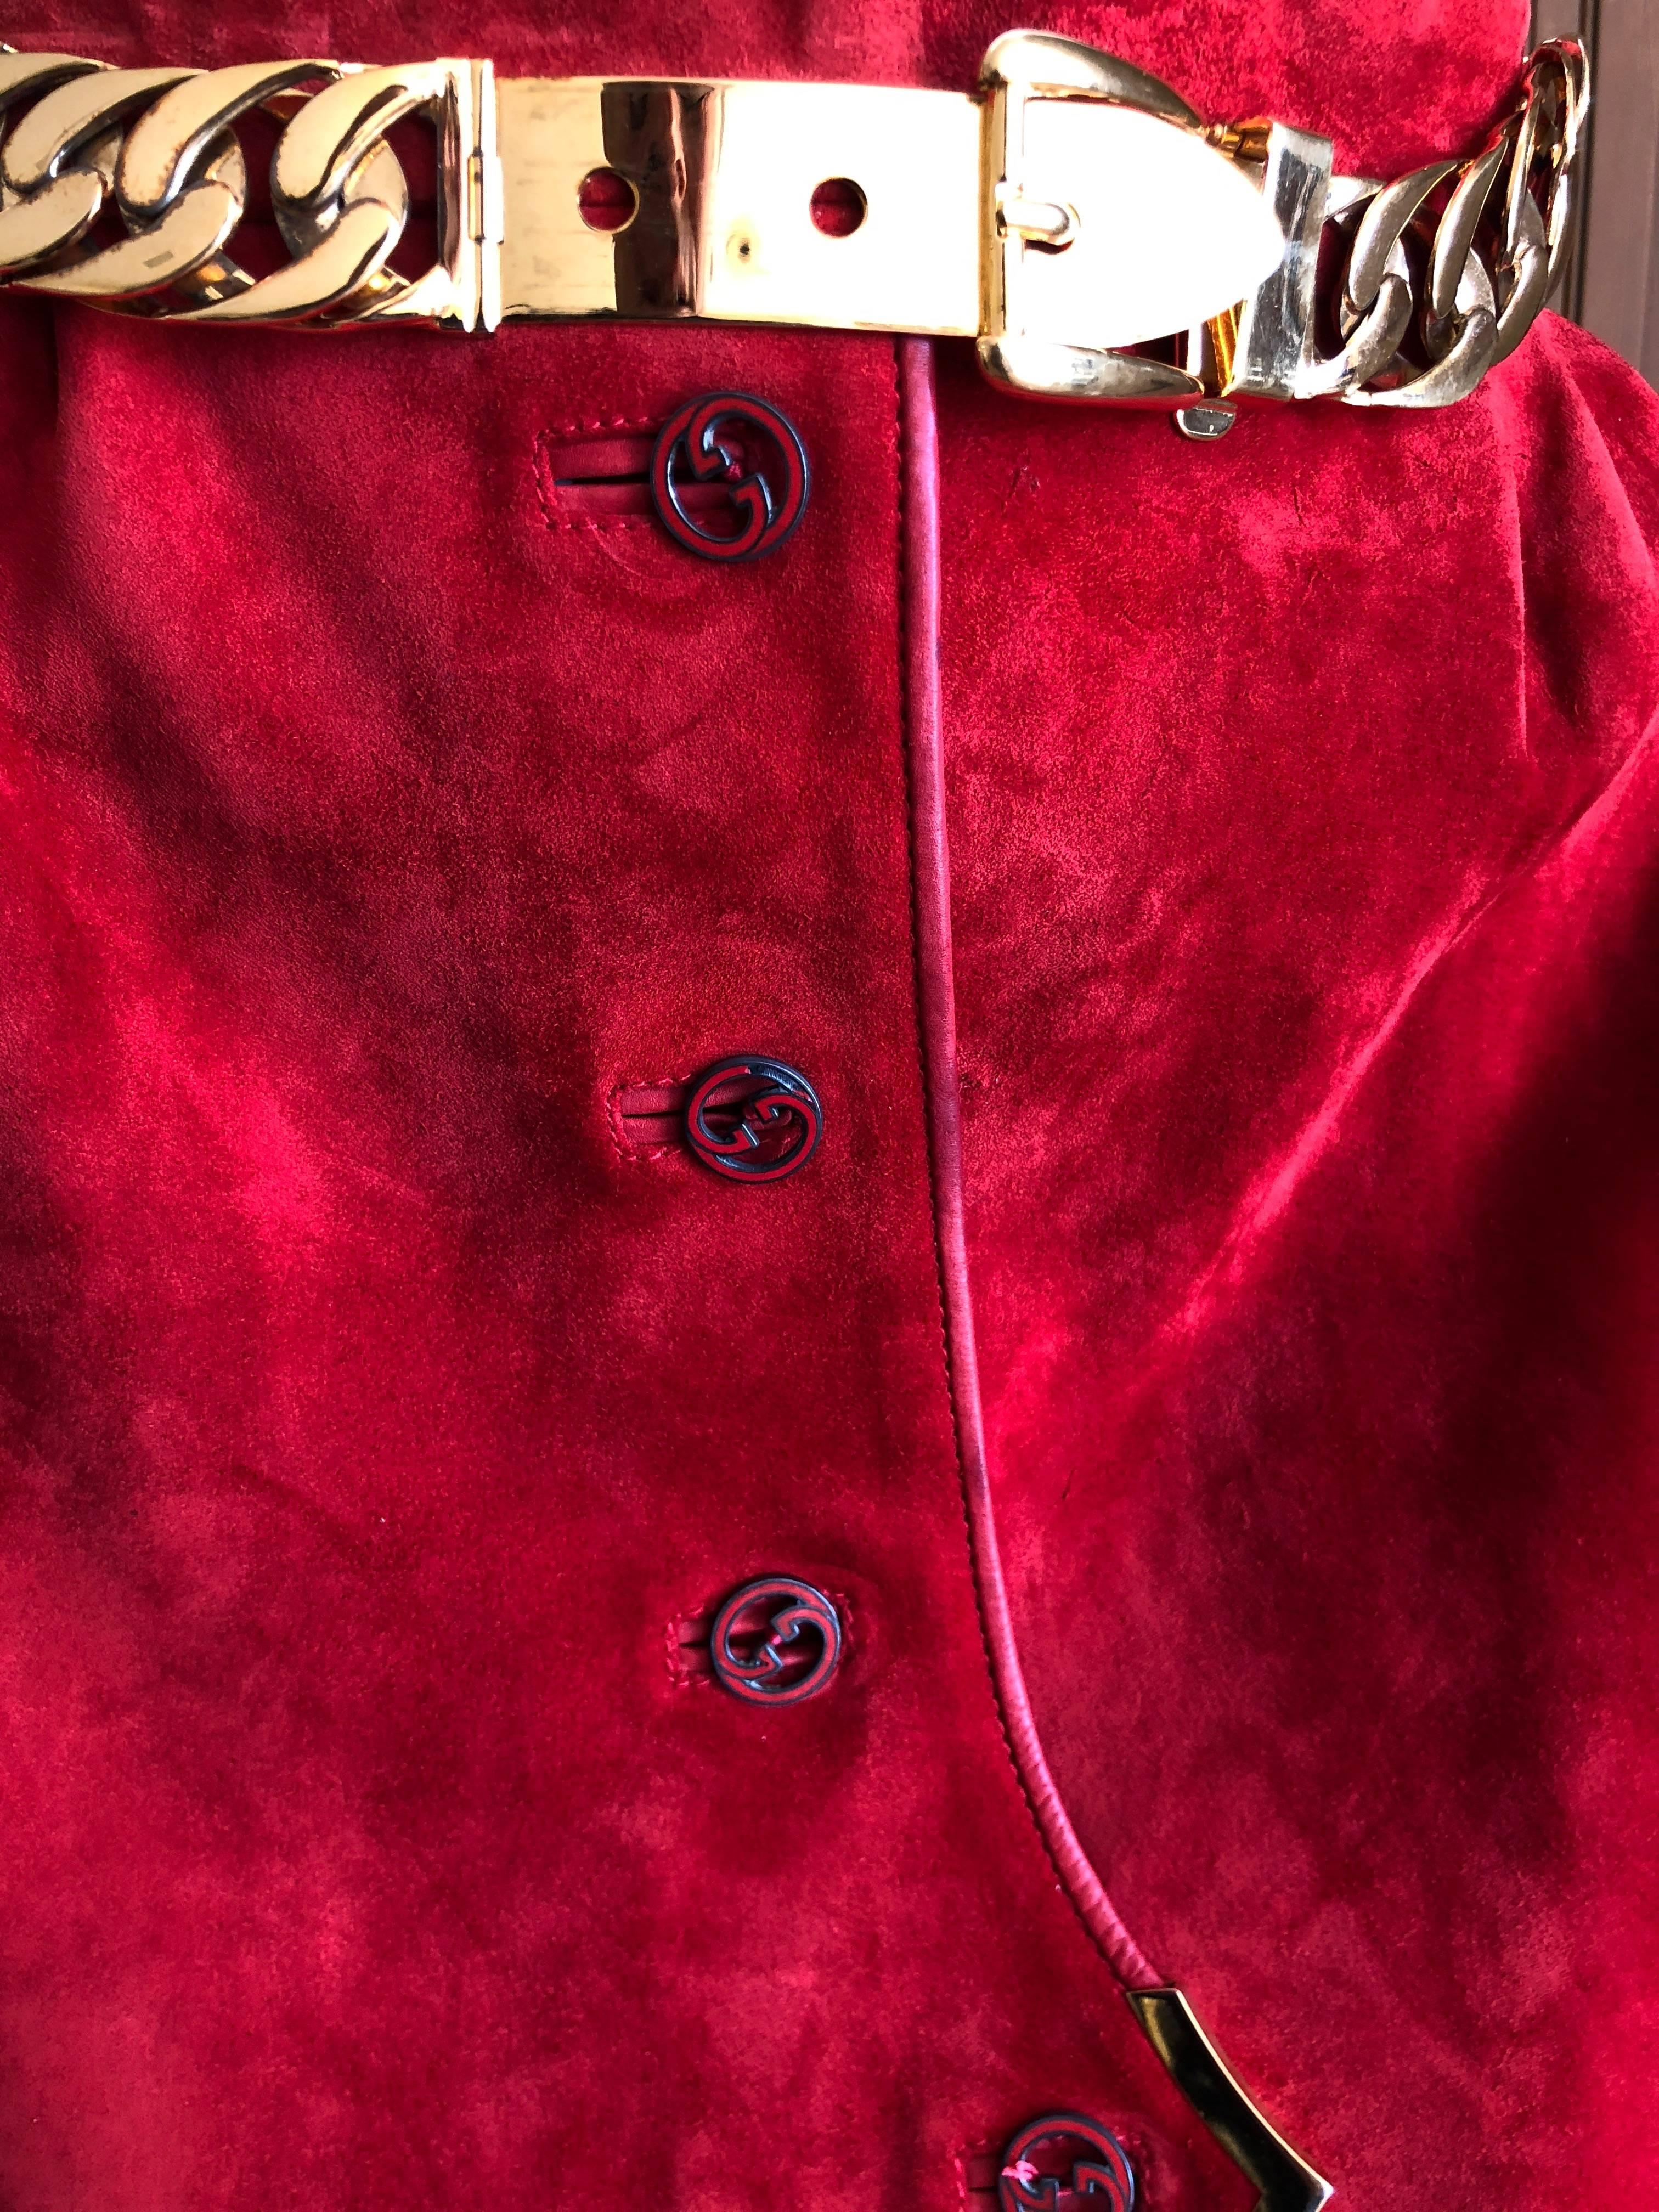  Gucci Vintage 70's Red Leather Trim Suede Skirt with Chain Details & Big GG Buttons
The size and brand tag are no longer attached ,Si9ze M
Waist 28